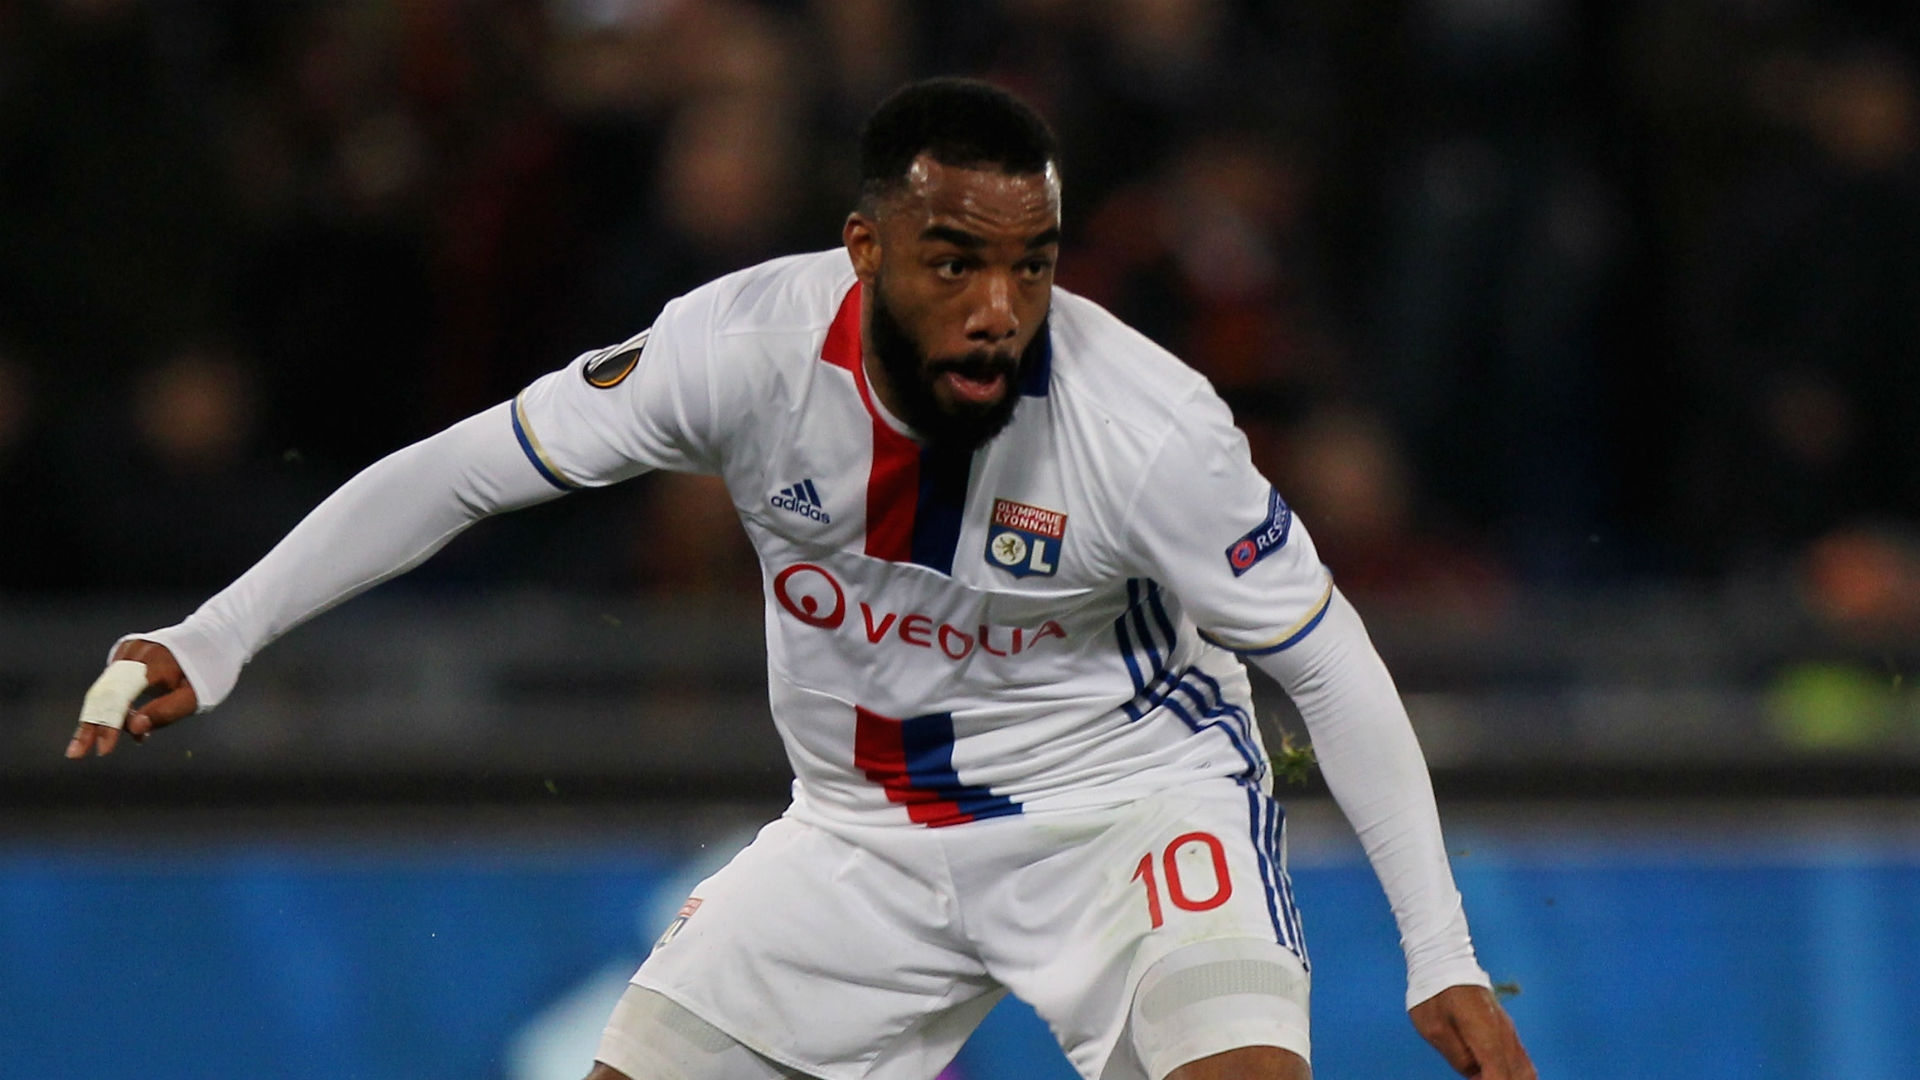 It looks like Lyon is quite anxious to reap rewards of Lacazette's best ever season.